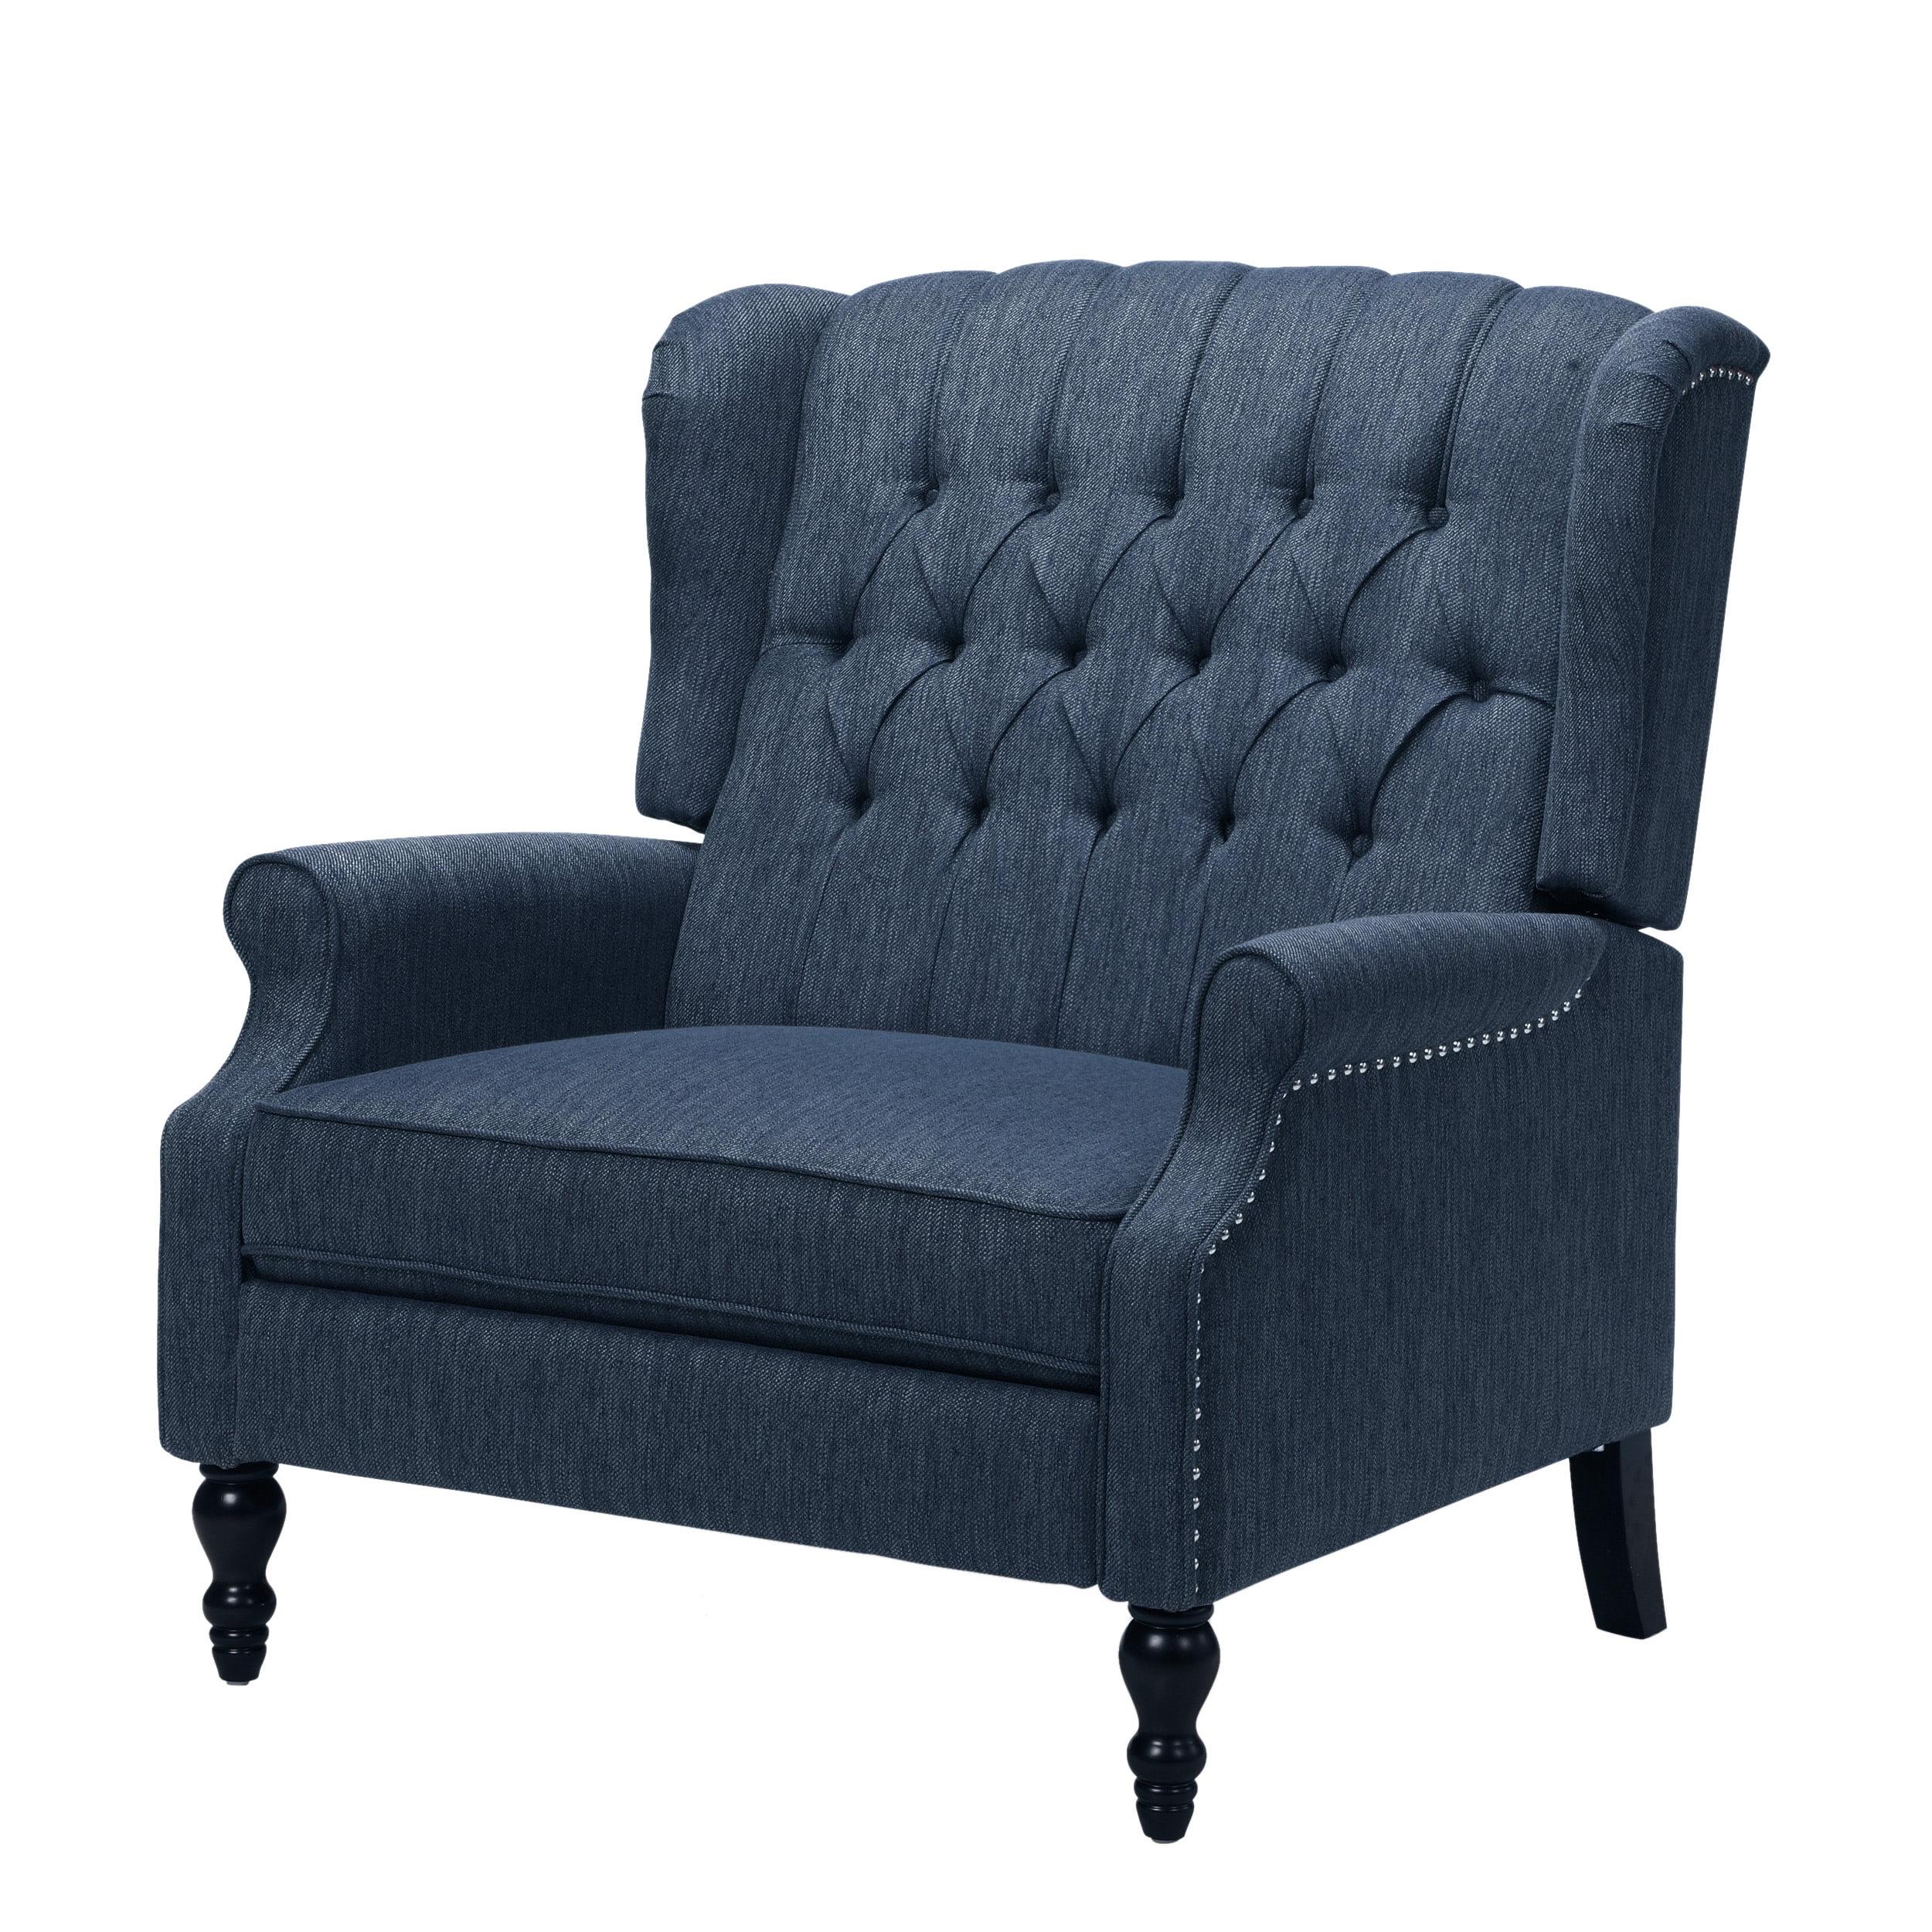 Handcrafted Navy Blue Oversized Wingback Recliner with Wood Accents